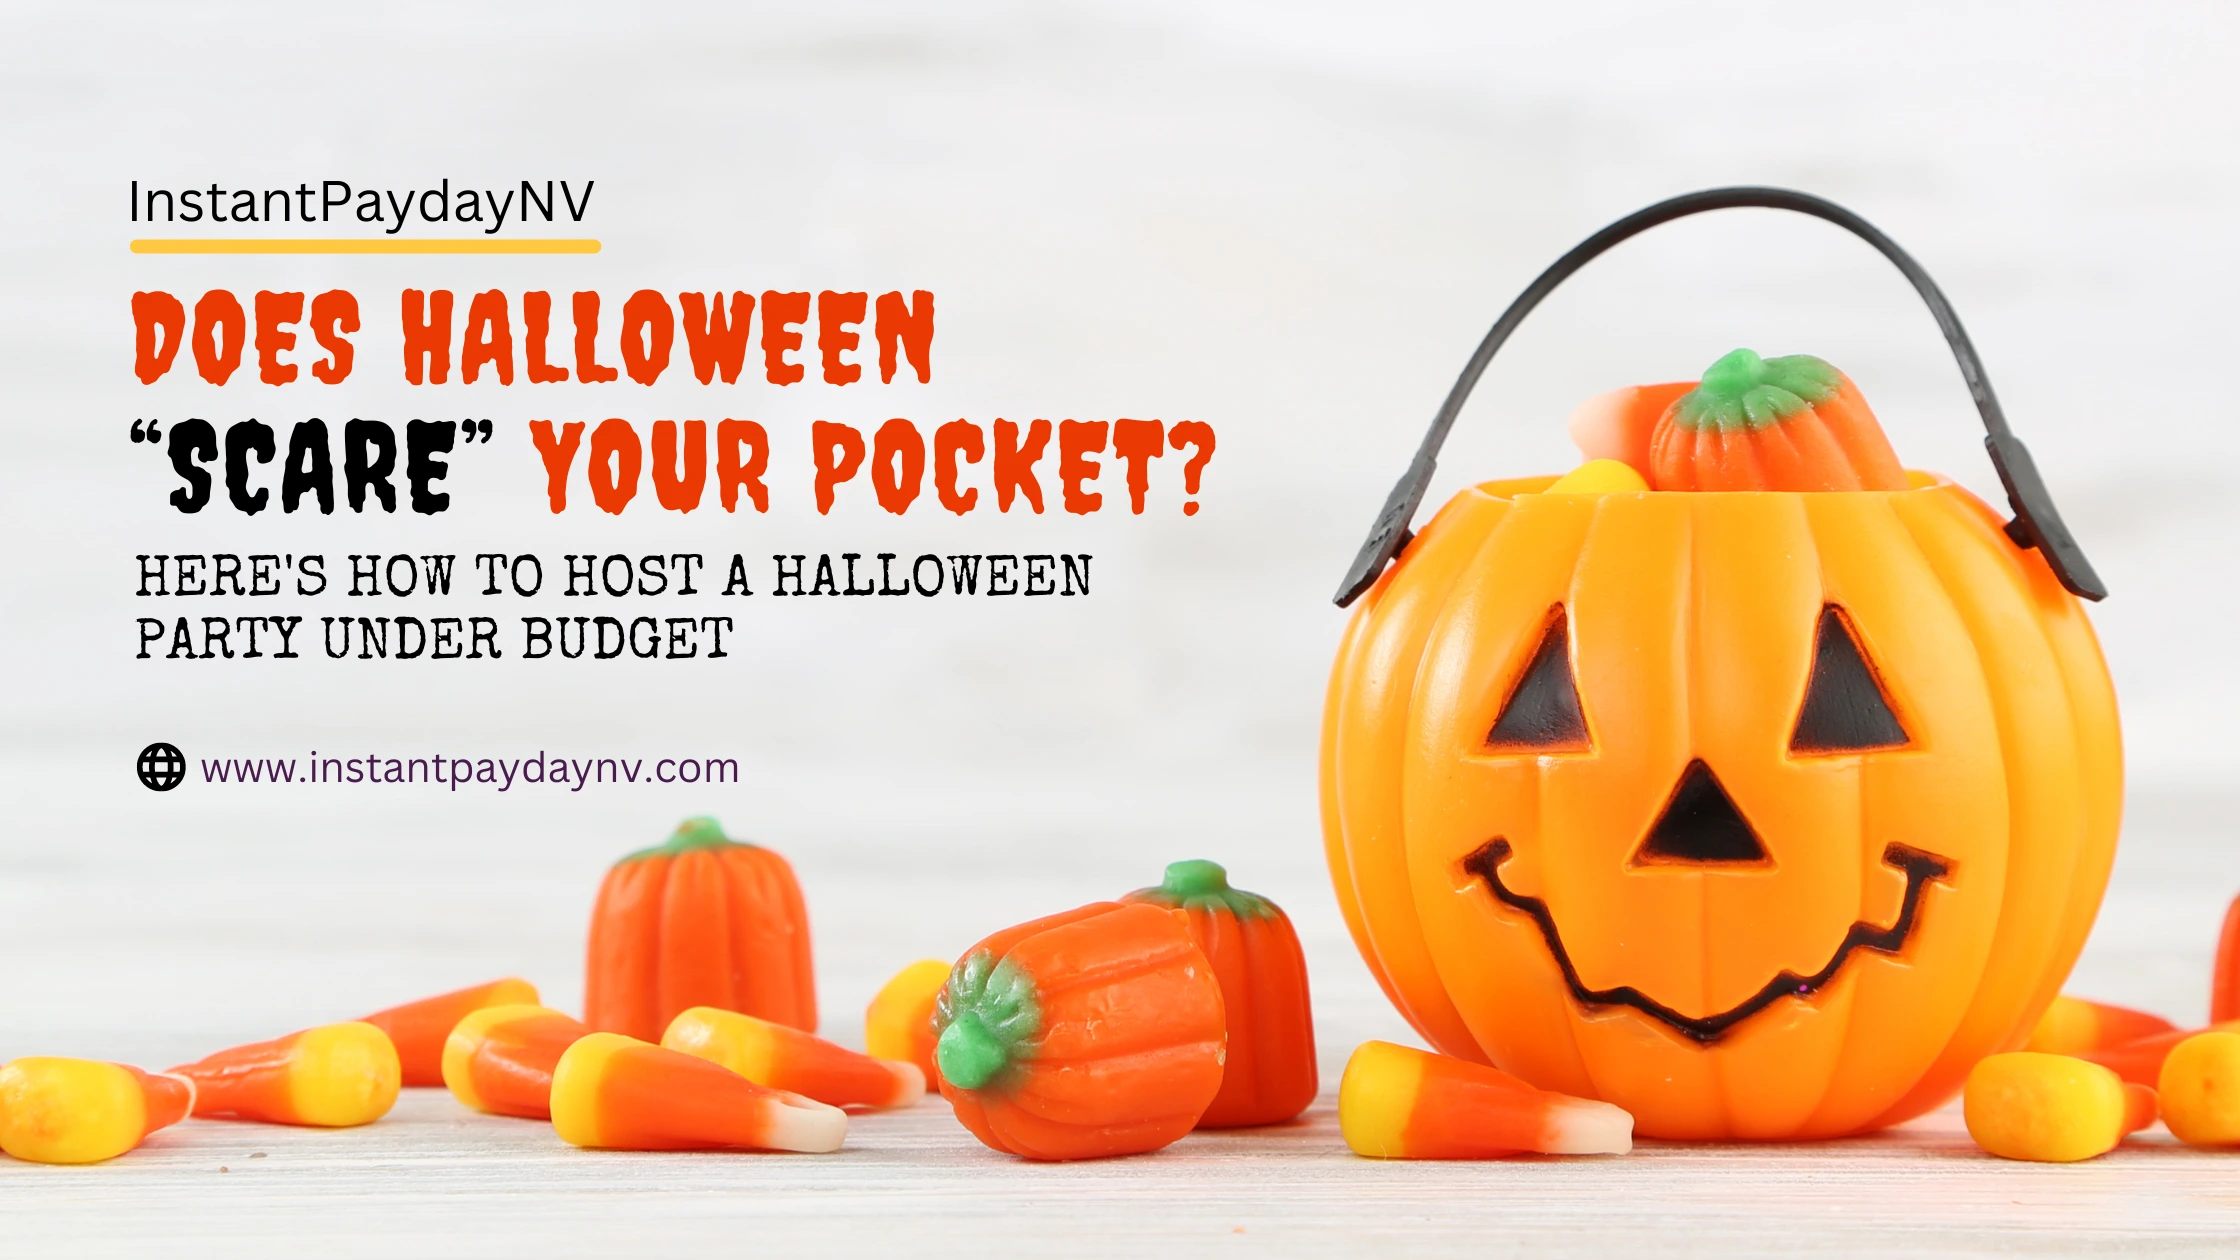 Does Halloween “Scare” Your Pocket